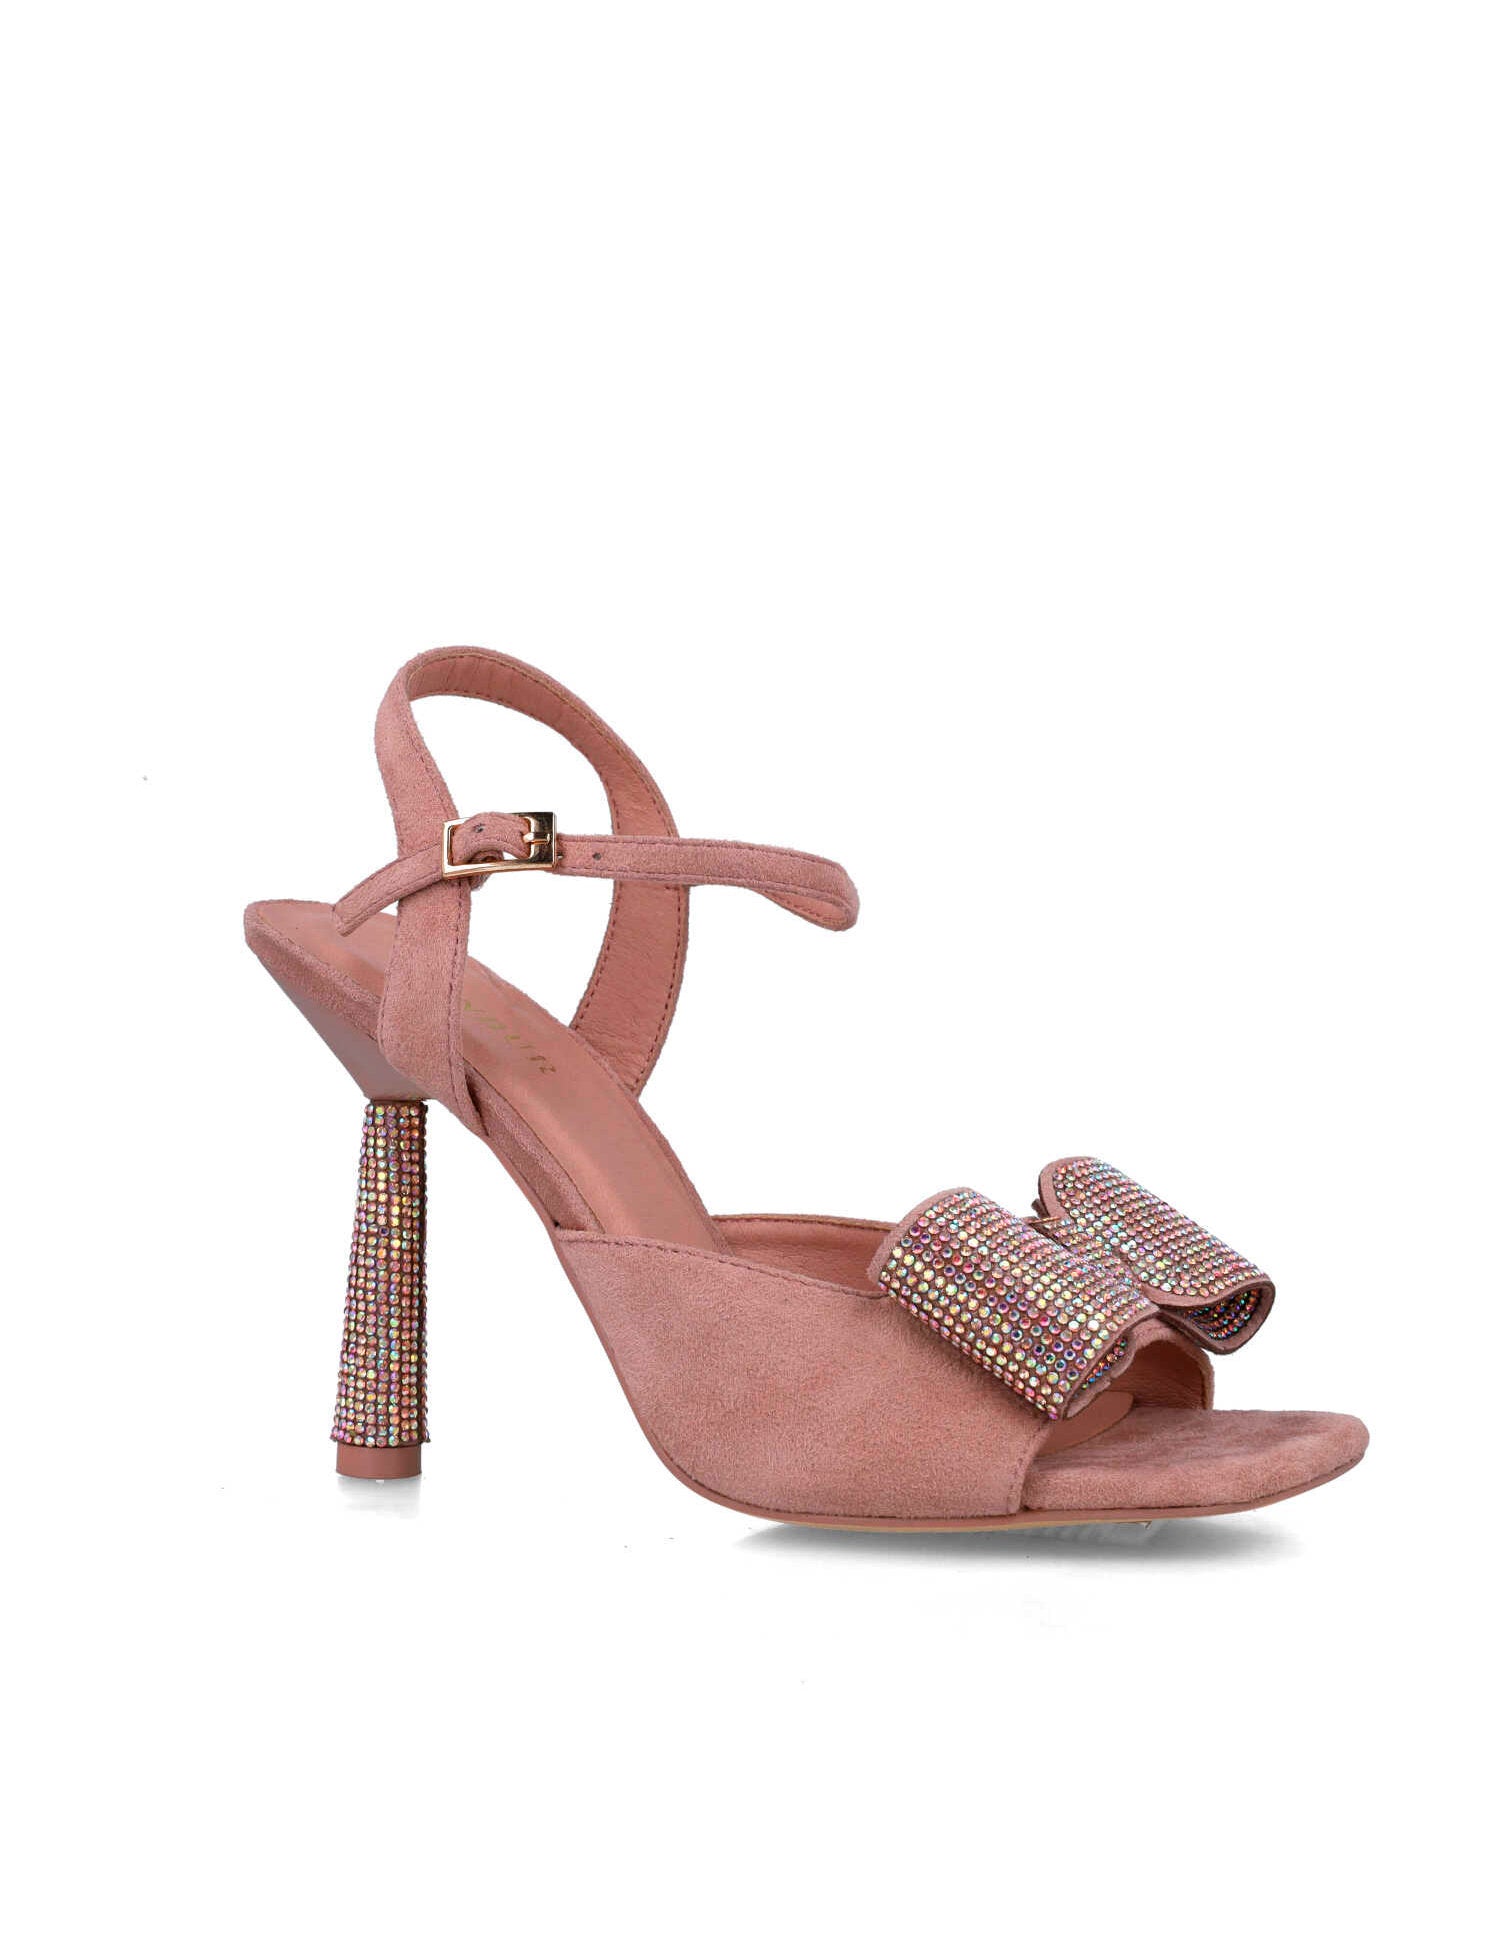 Pink High-Heel Sandals With Embellished Bow_25442_97_02